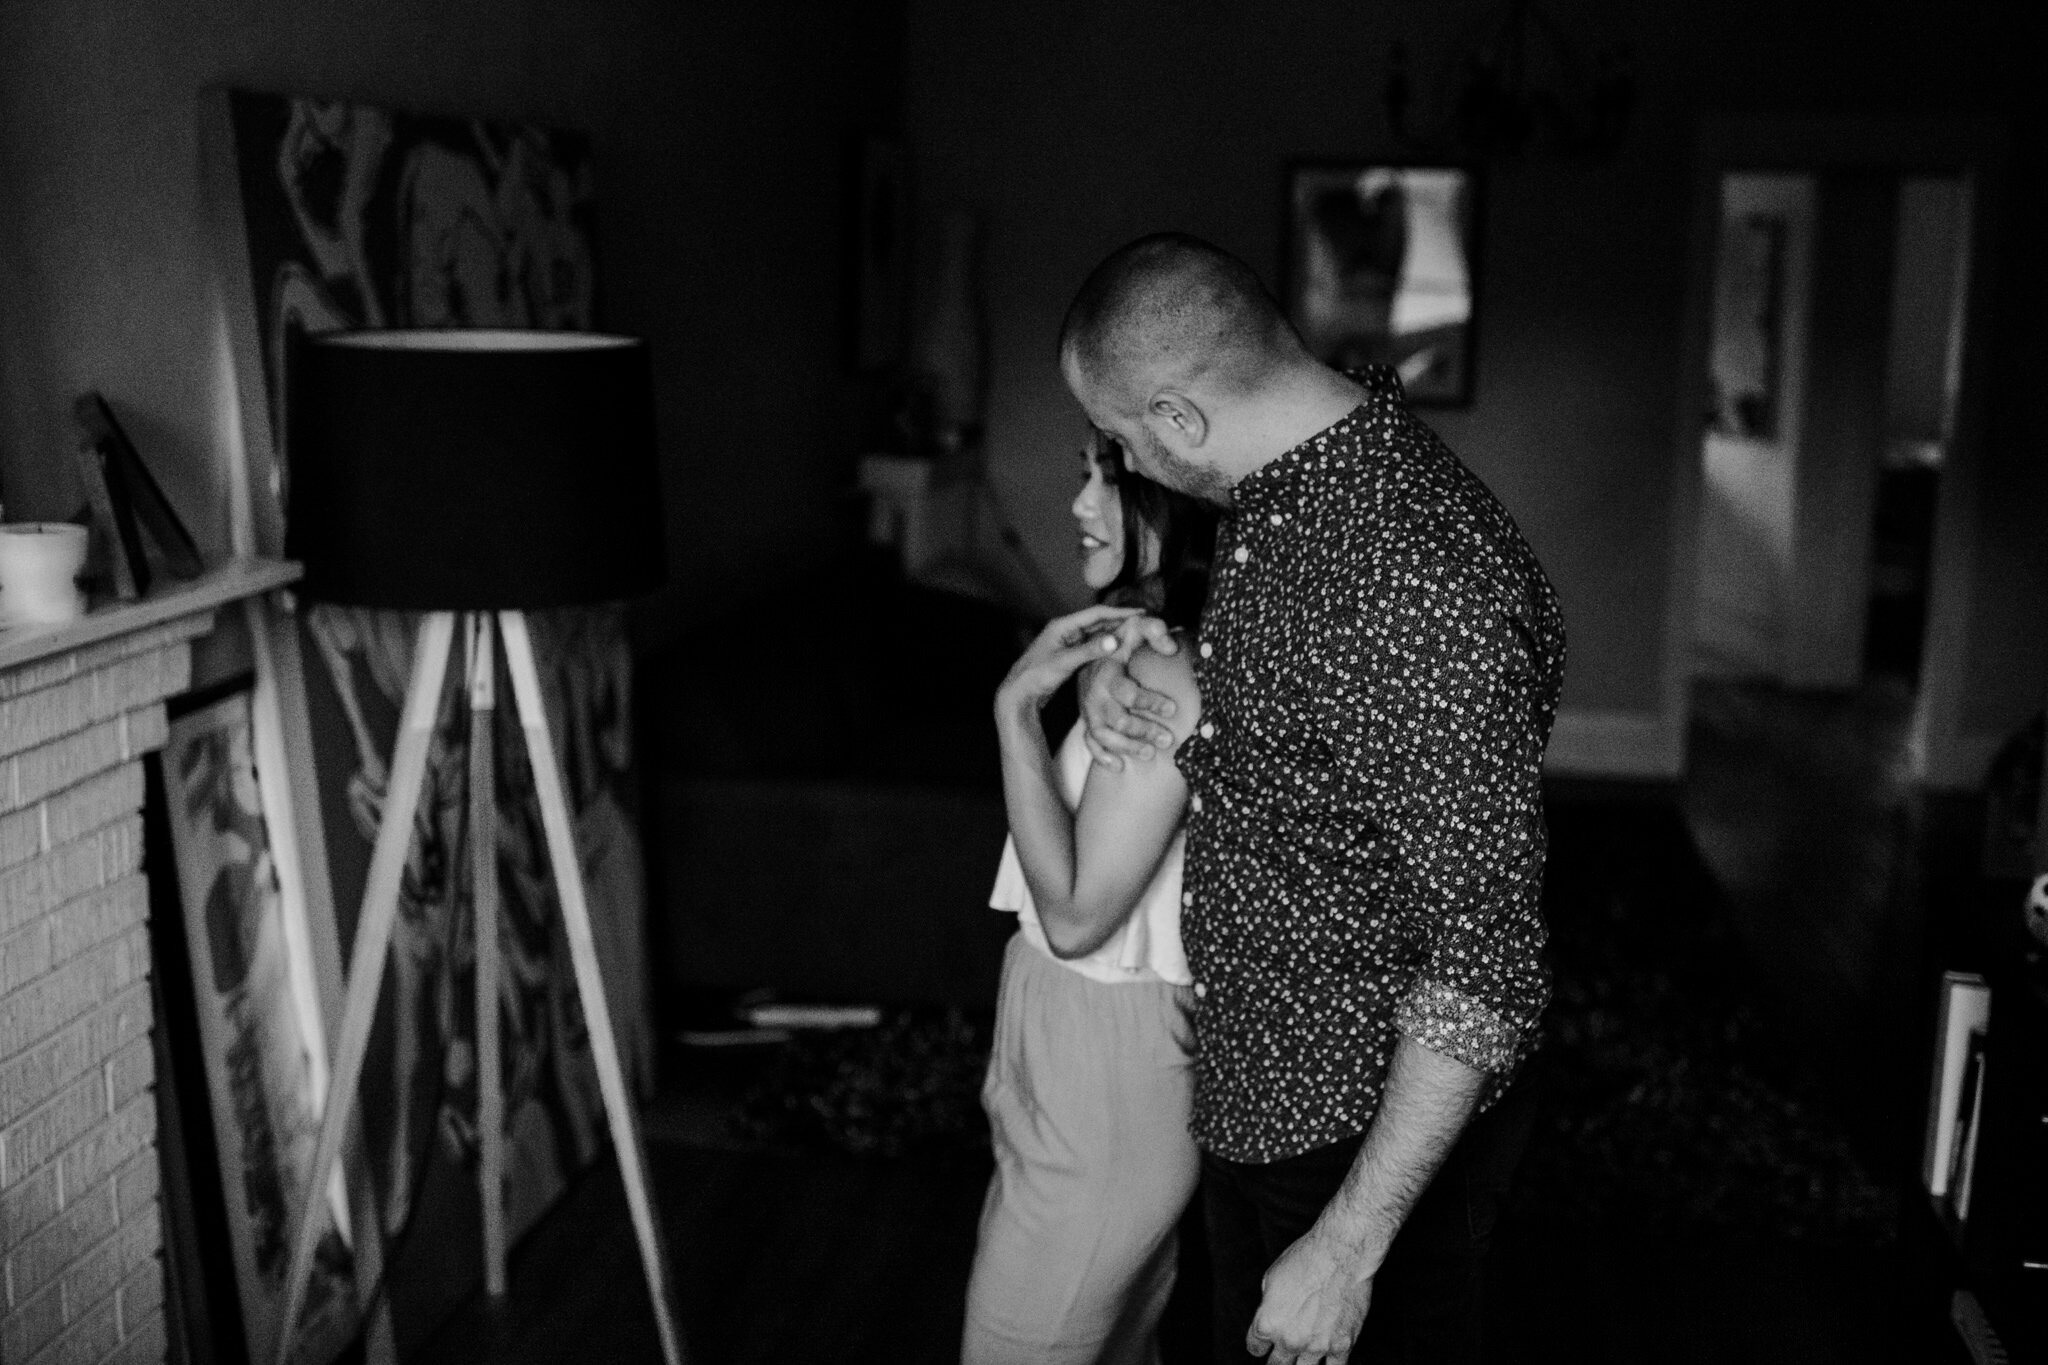 980-black-white-at-home-documentary-engagement-session-photos-downtown-toronto.jpg